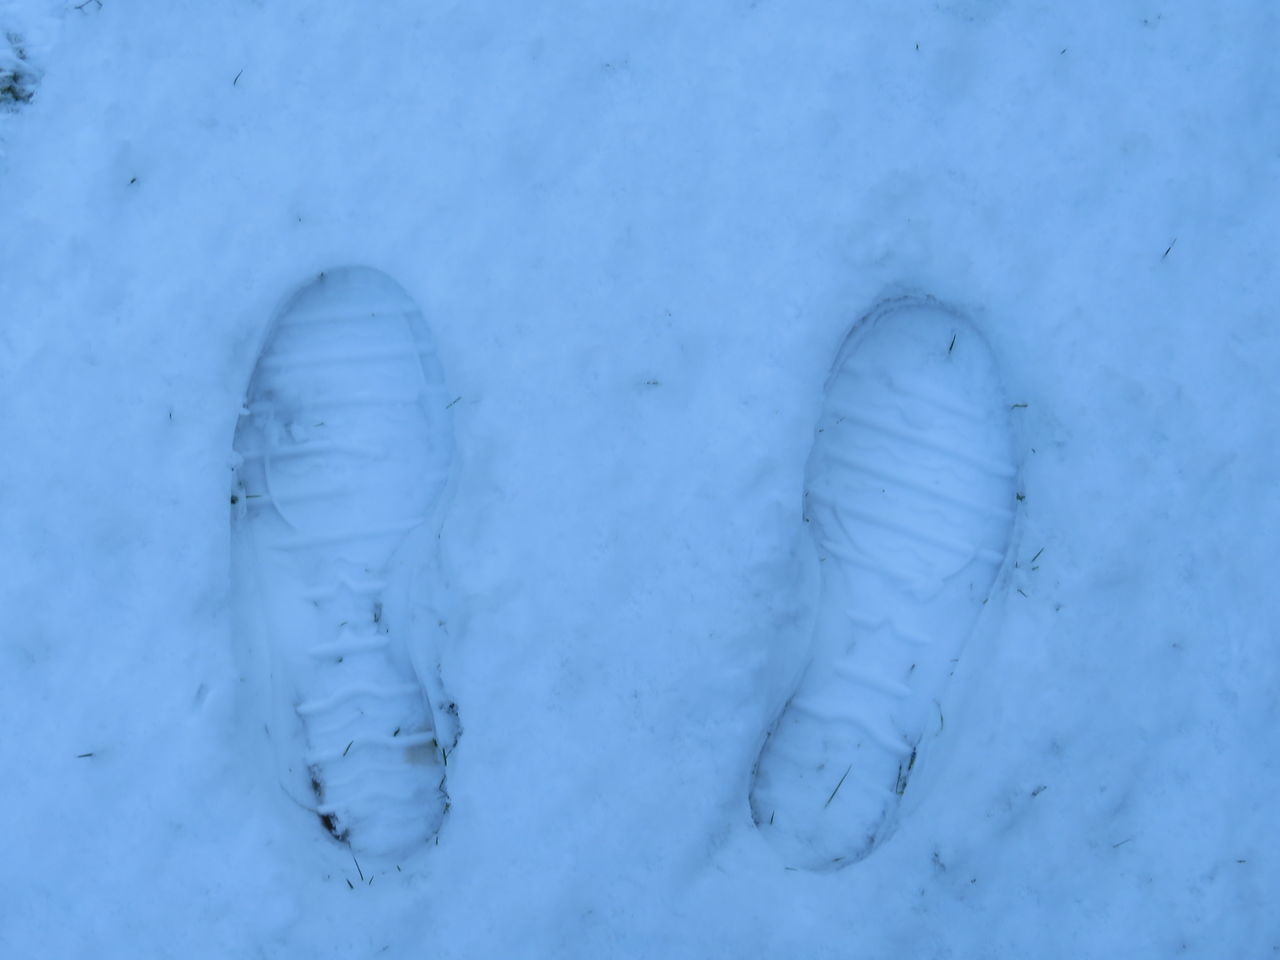 HIGH ANGLE VIEW OF FOOTPRINT ON SNOW